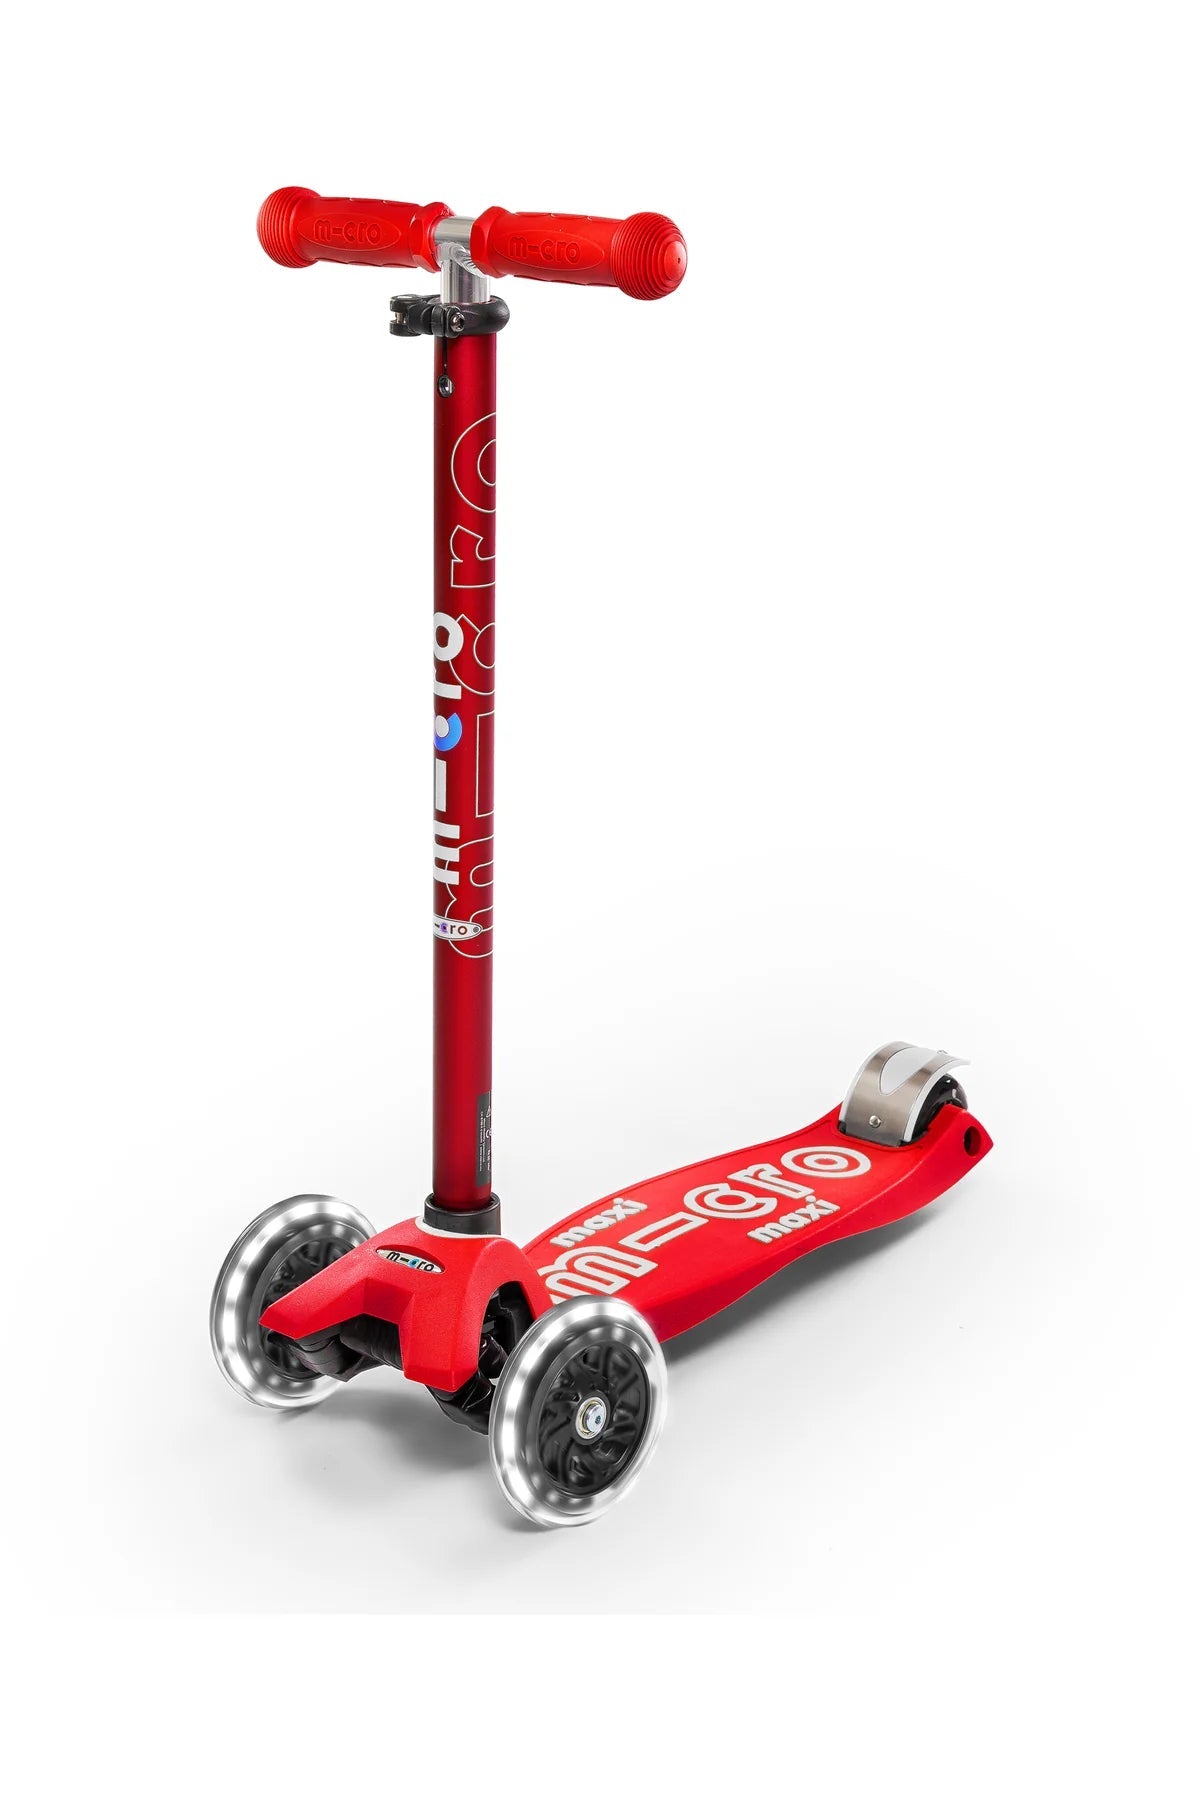 Micro Kickboard Maxi Deluxe 3-Wheeled Scooter - ANB Baby -7640108560780$100 - $300